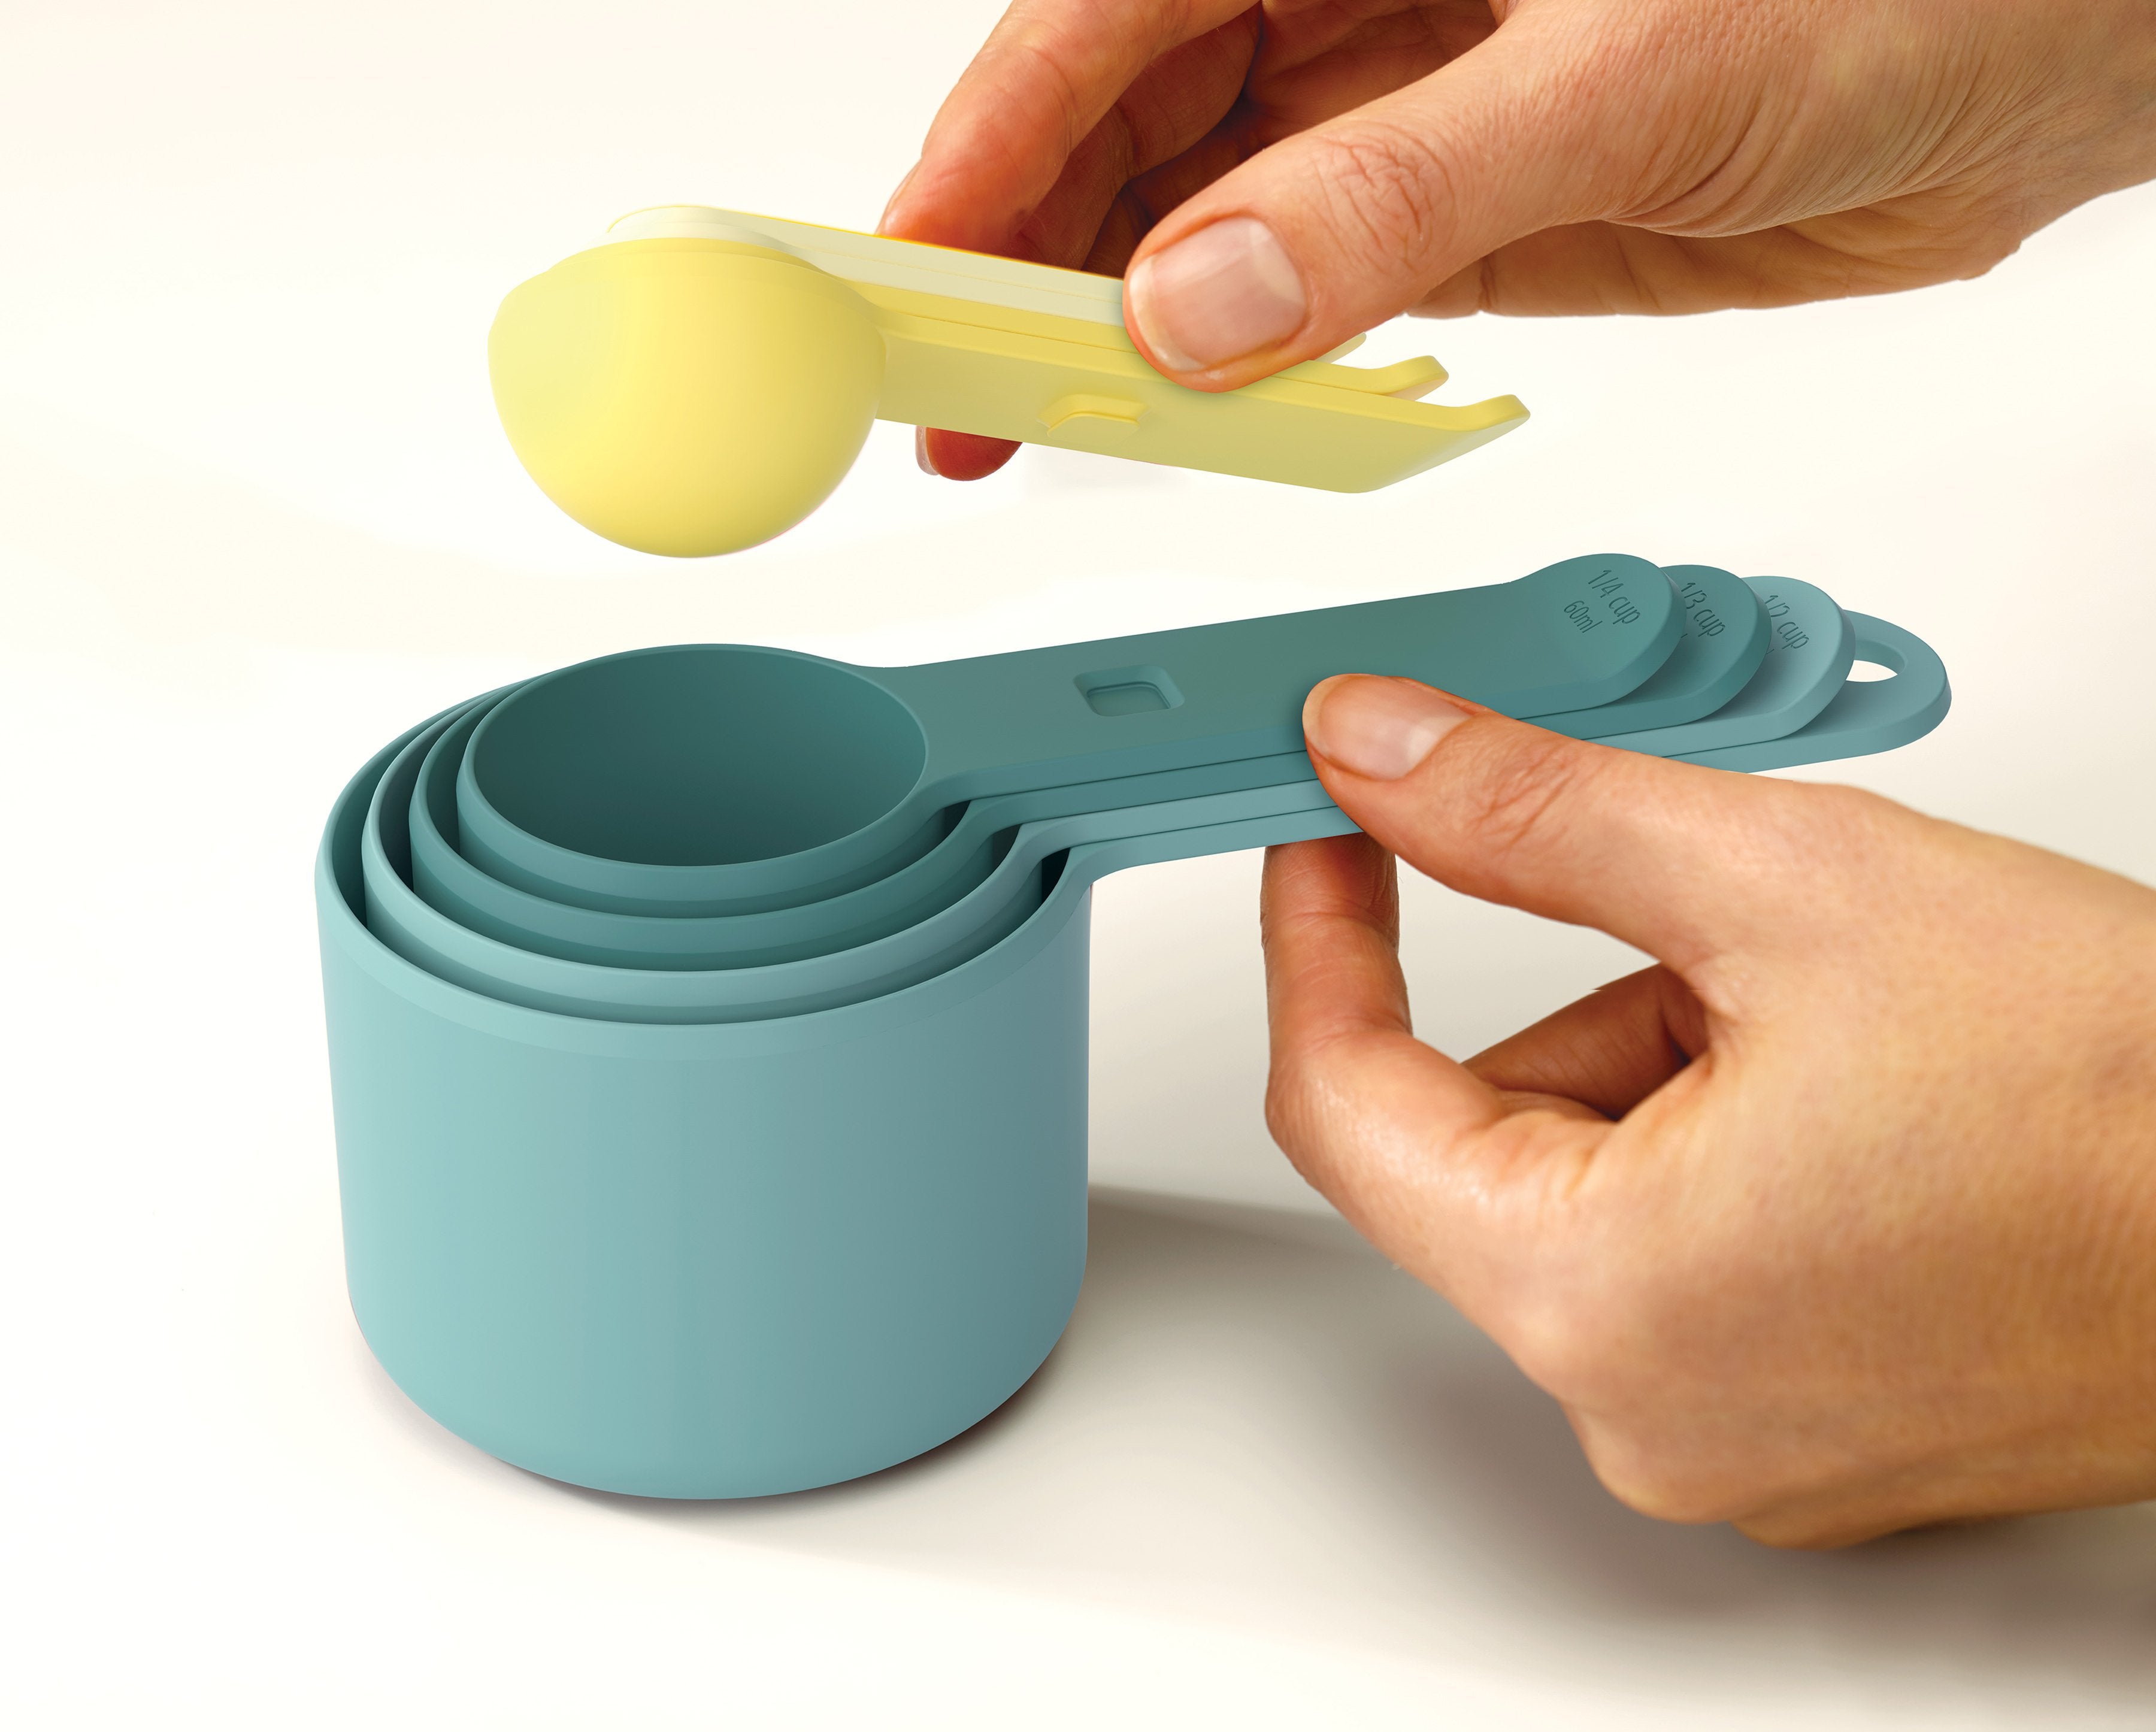 BEON.COM.AU  These measuring cup sets feature 8 different cup sizes ranging from ¼ tsp (1.25ml) up to 1 cup (250ml) but all stack neatly together to take up minimal room in your drawer or cupboard.  8-piece set includes: measures from ¼ teaspoon (1.25ml) up to 1 cup (250ml) Snap-together handles Innovative s... Joseph Joseph at BEON.COM.AU